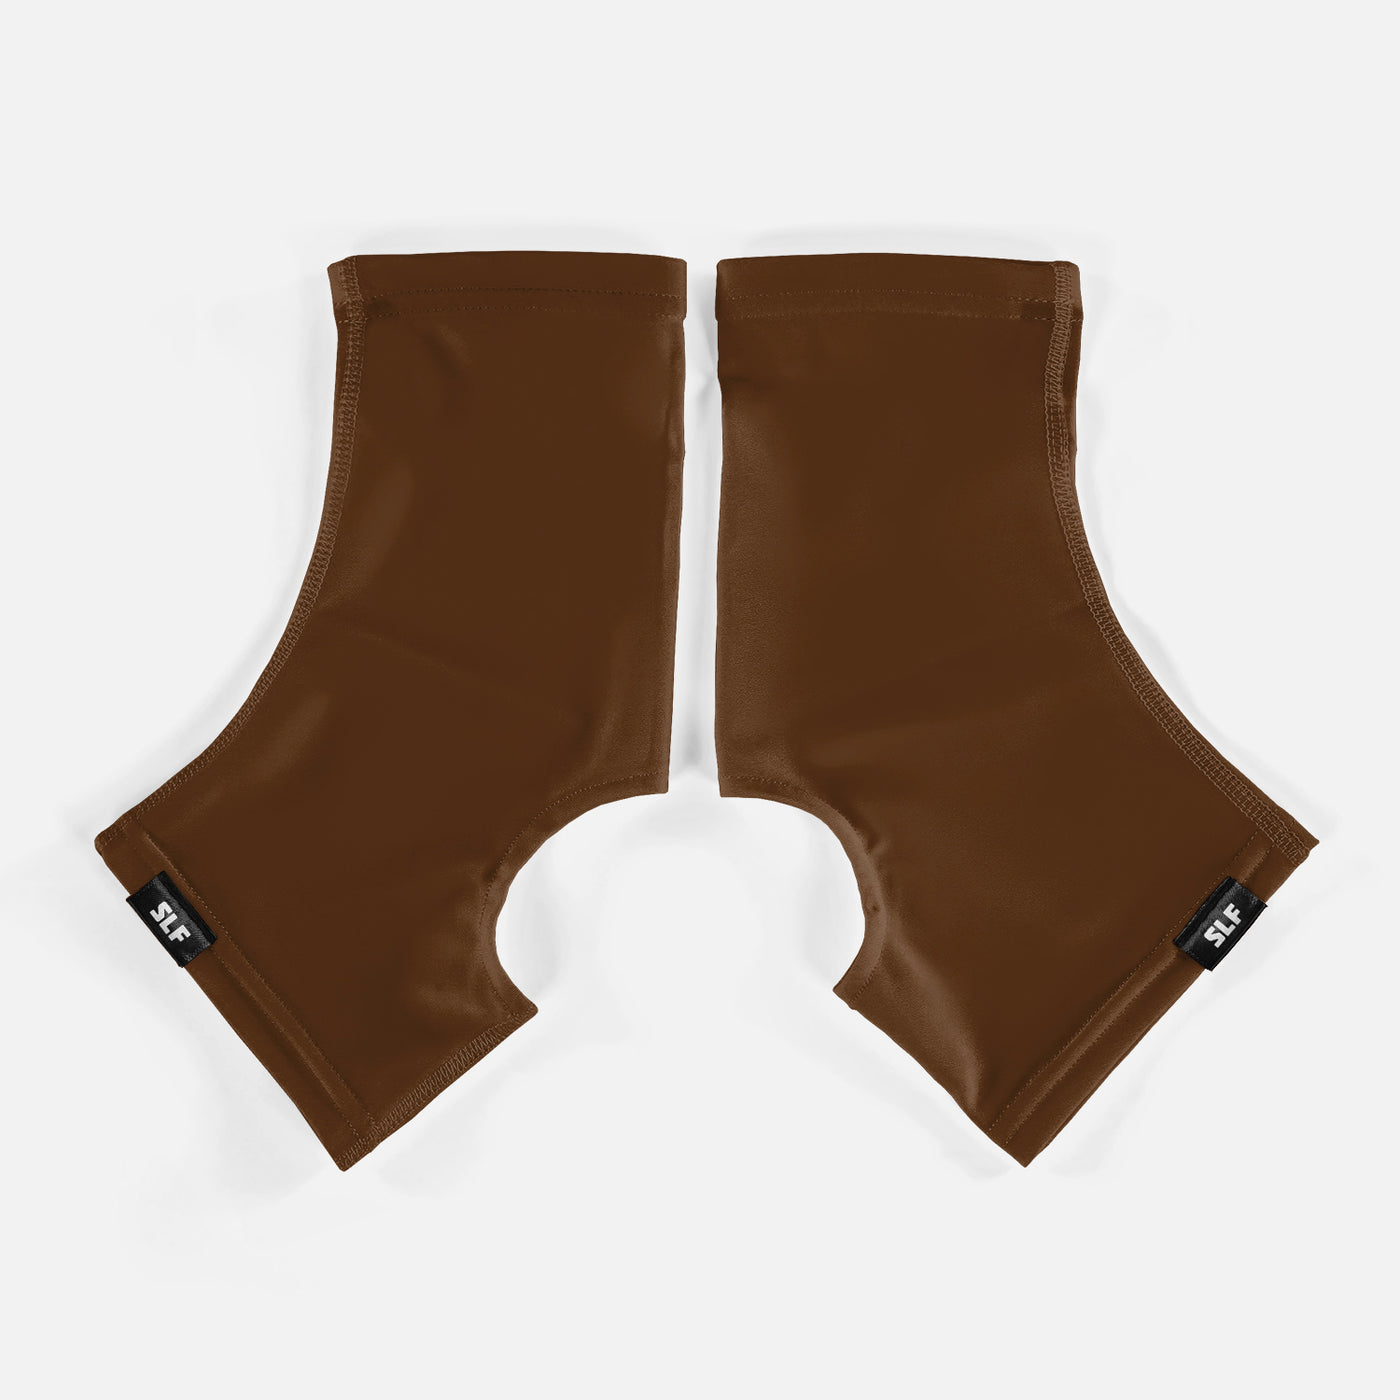 Hue Brown Spats / Cleat Covers